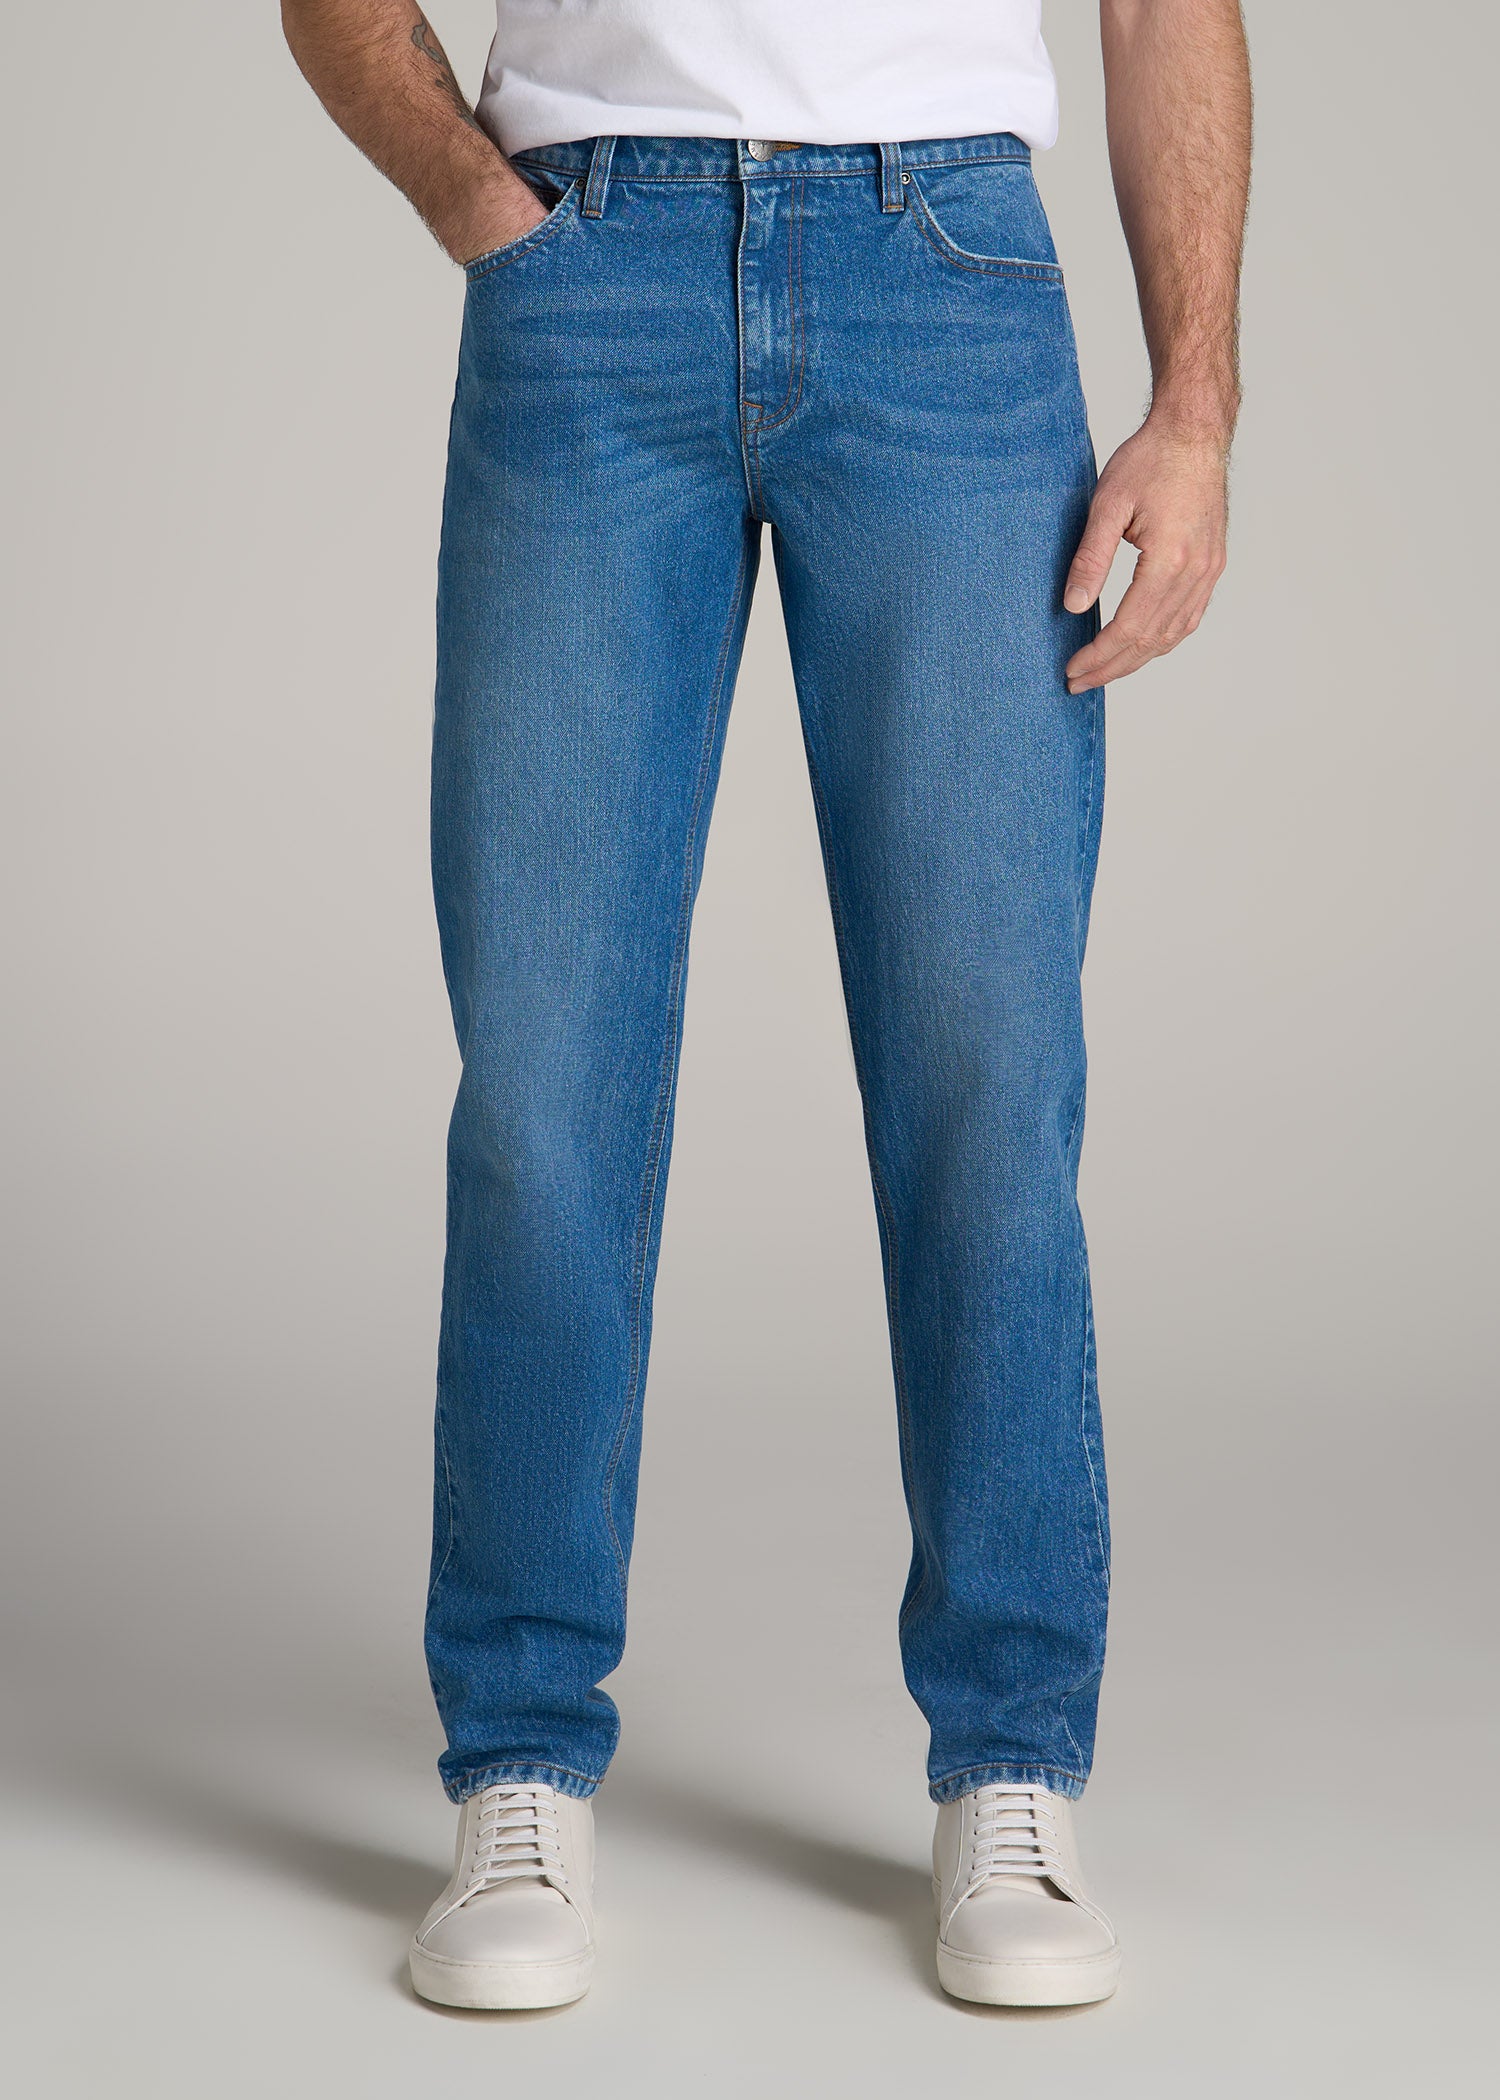 $59 Men's Jeans and Chinos